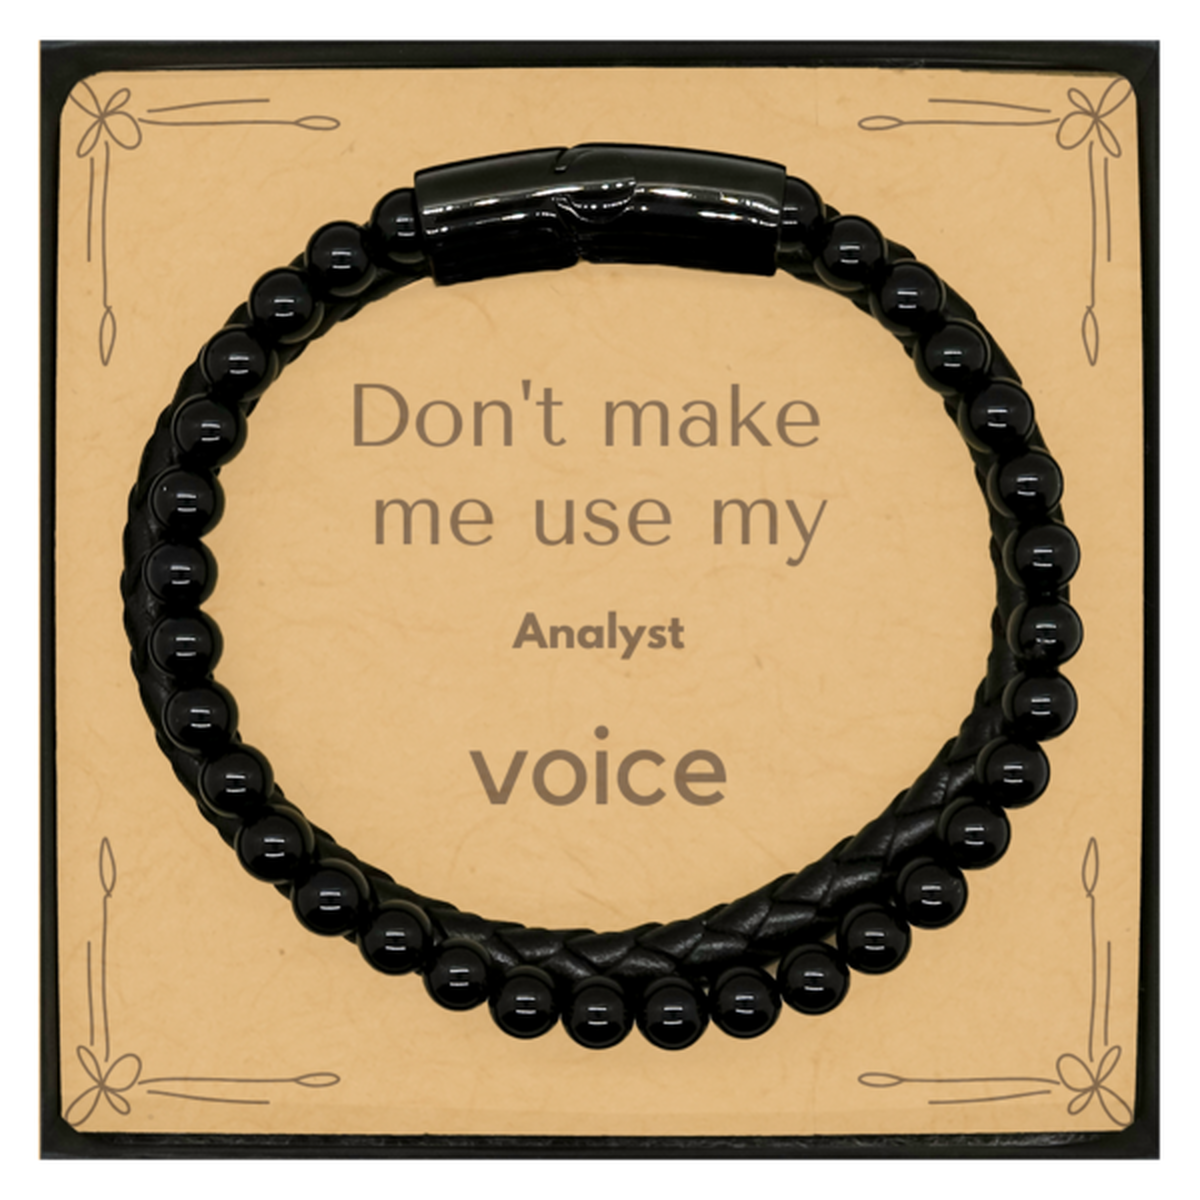 Don't make me use my Analyst voice, Sarcasm Analyst Card Gifts, Christmas Analyst Stone Leather Bracelets Birthday Unique Gifts For Analyst Coworkers, Men, Women, Colleague, Friends